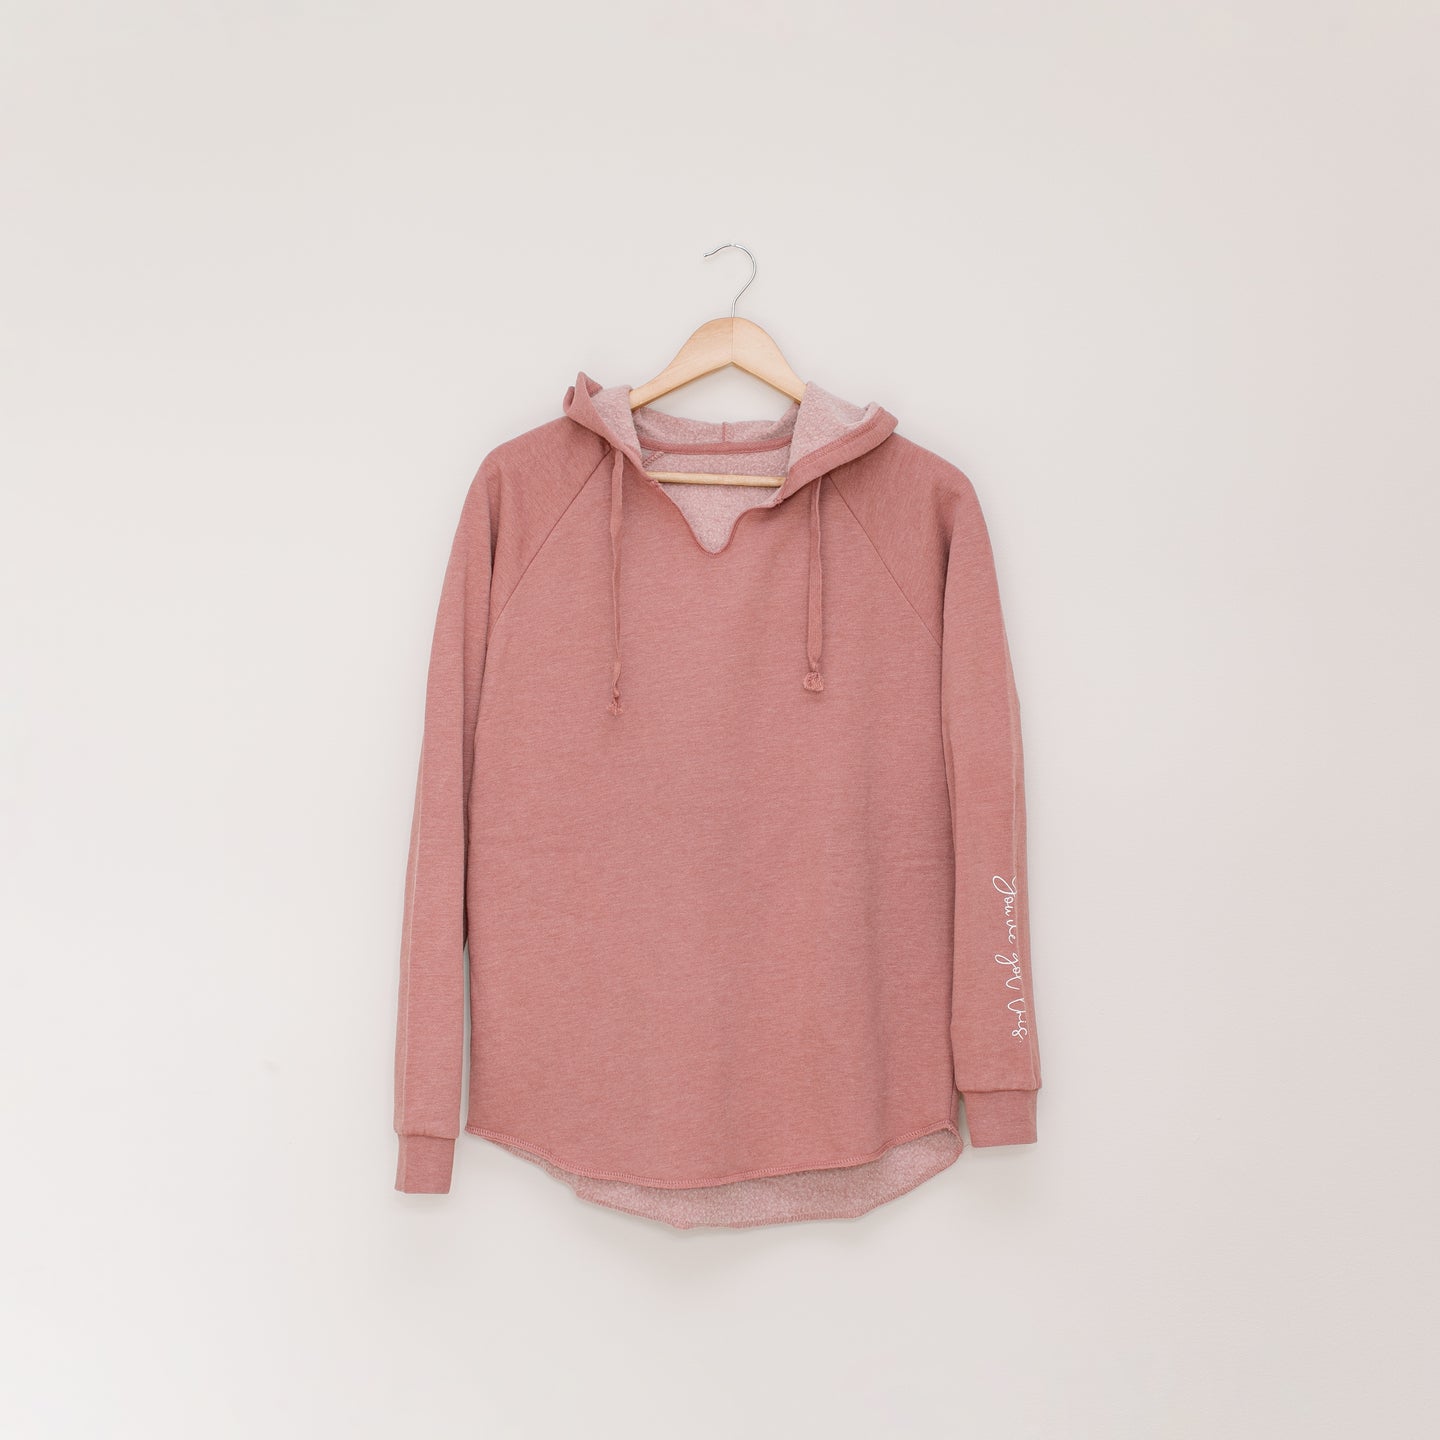 You've Got This! Hoodie - Dusty Rose